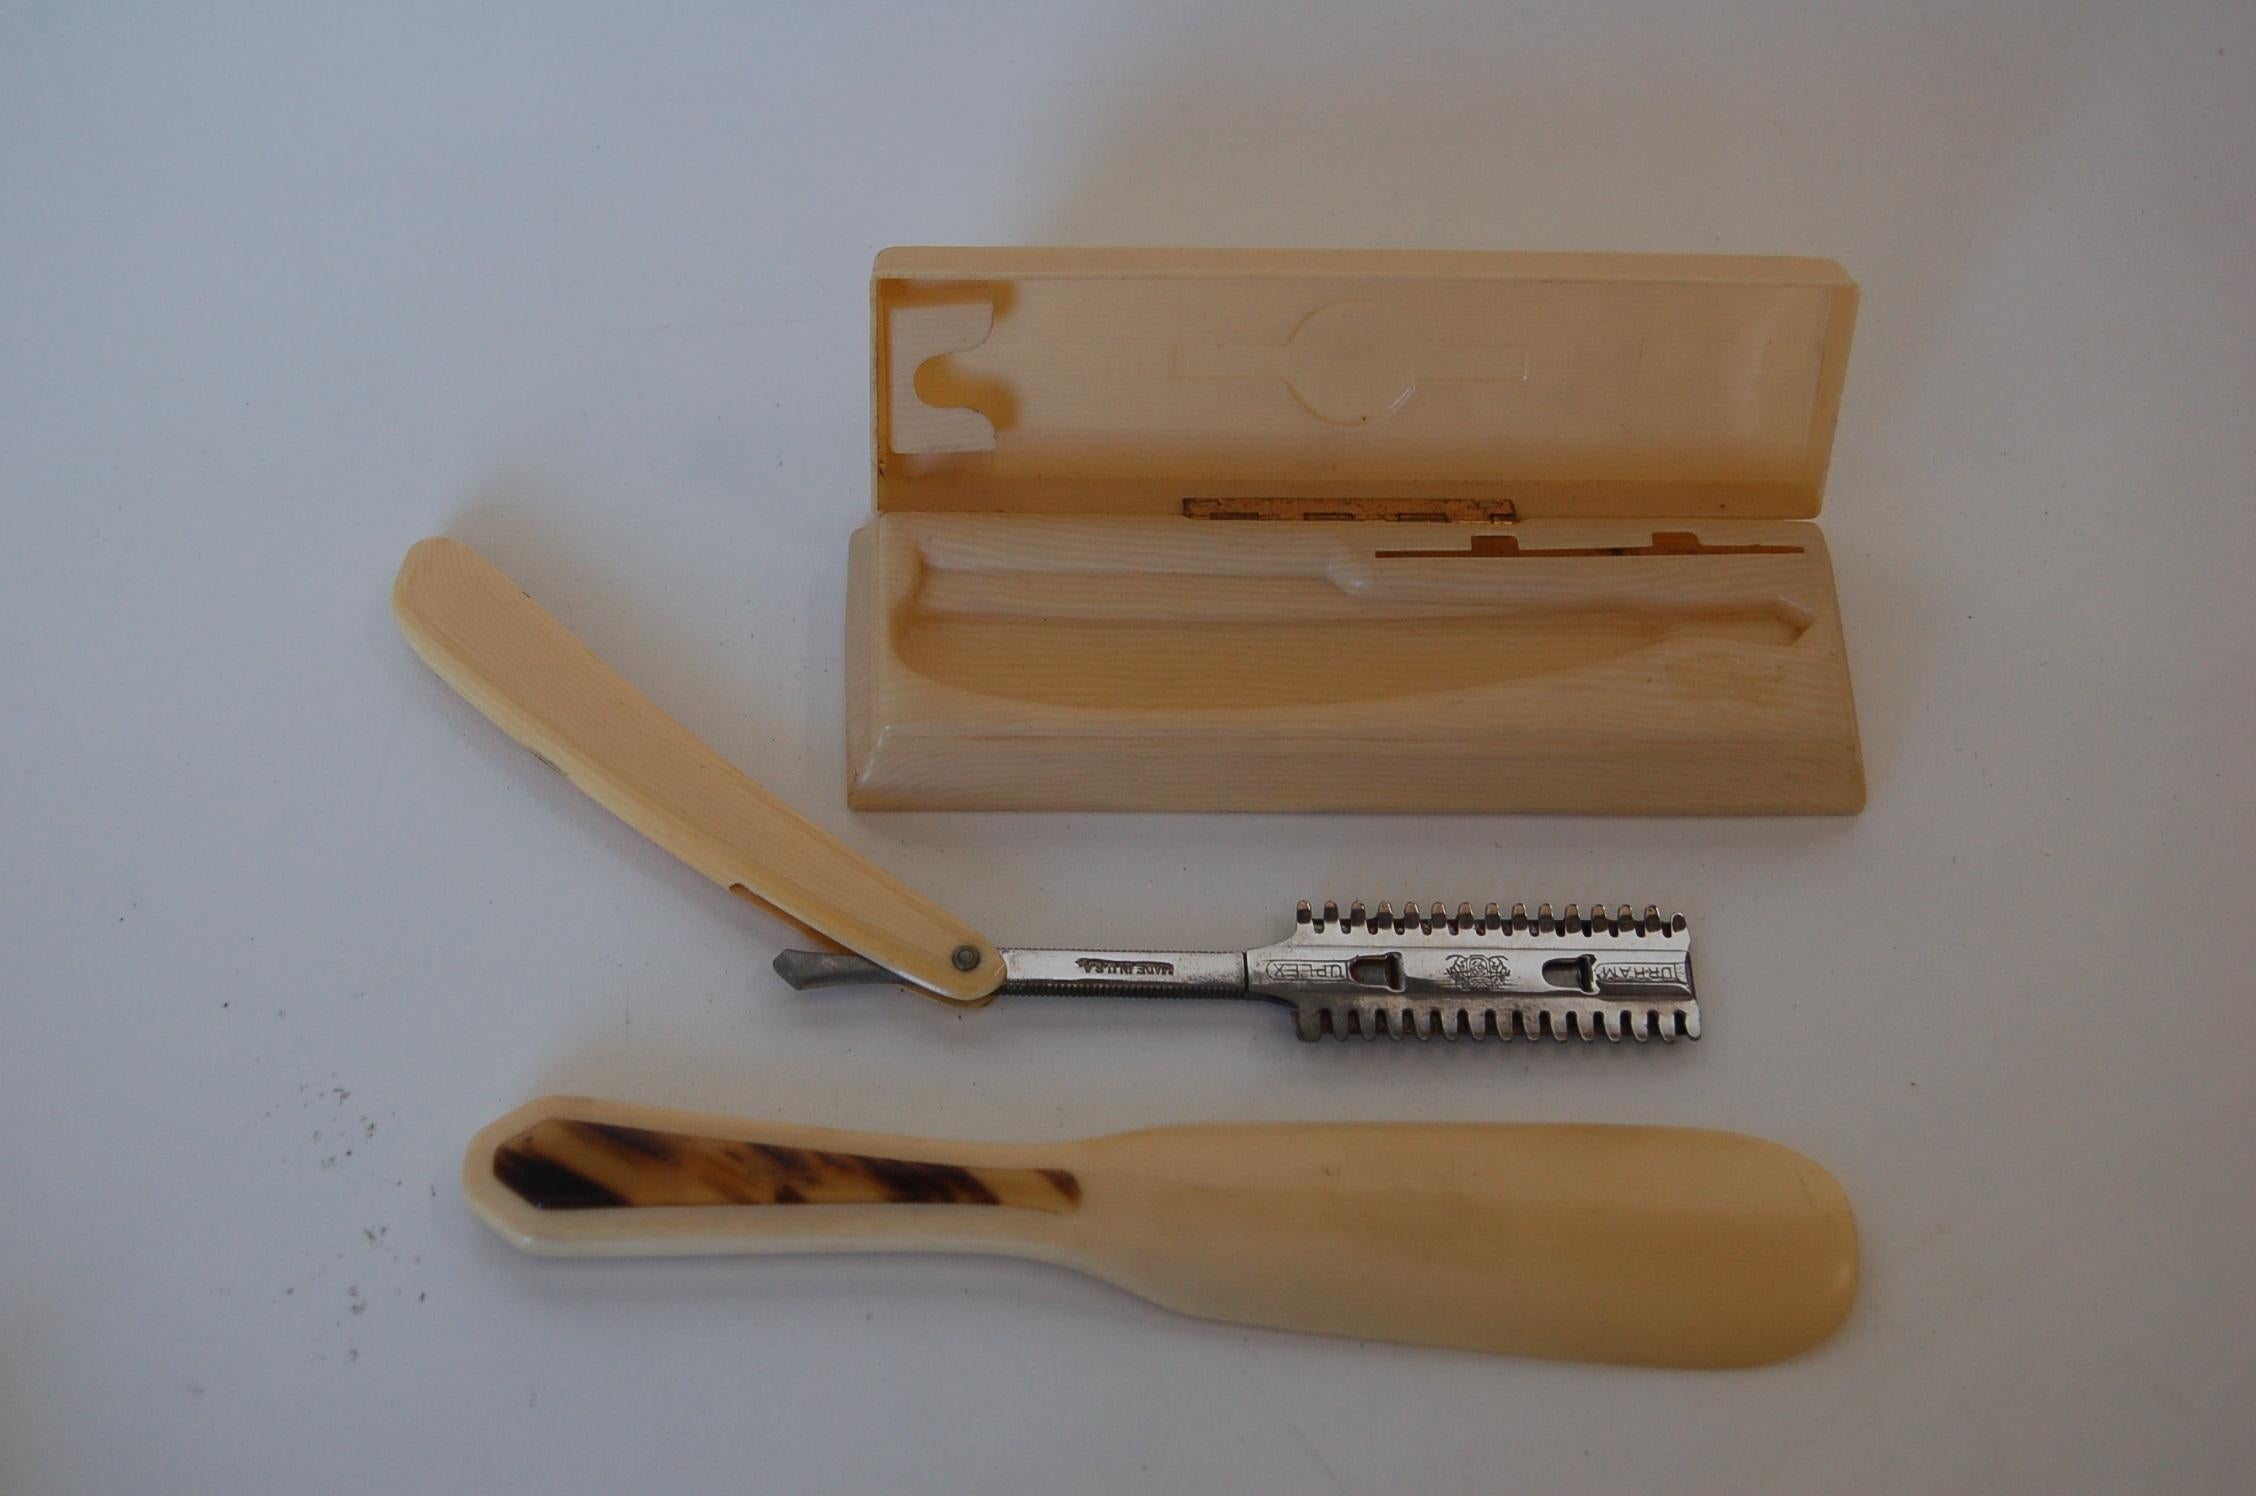 Antique 1920s Durham Duplex straight razor and shoe horn French ivory celluloid. 

Shaver measures 1